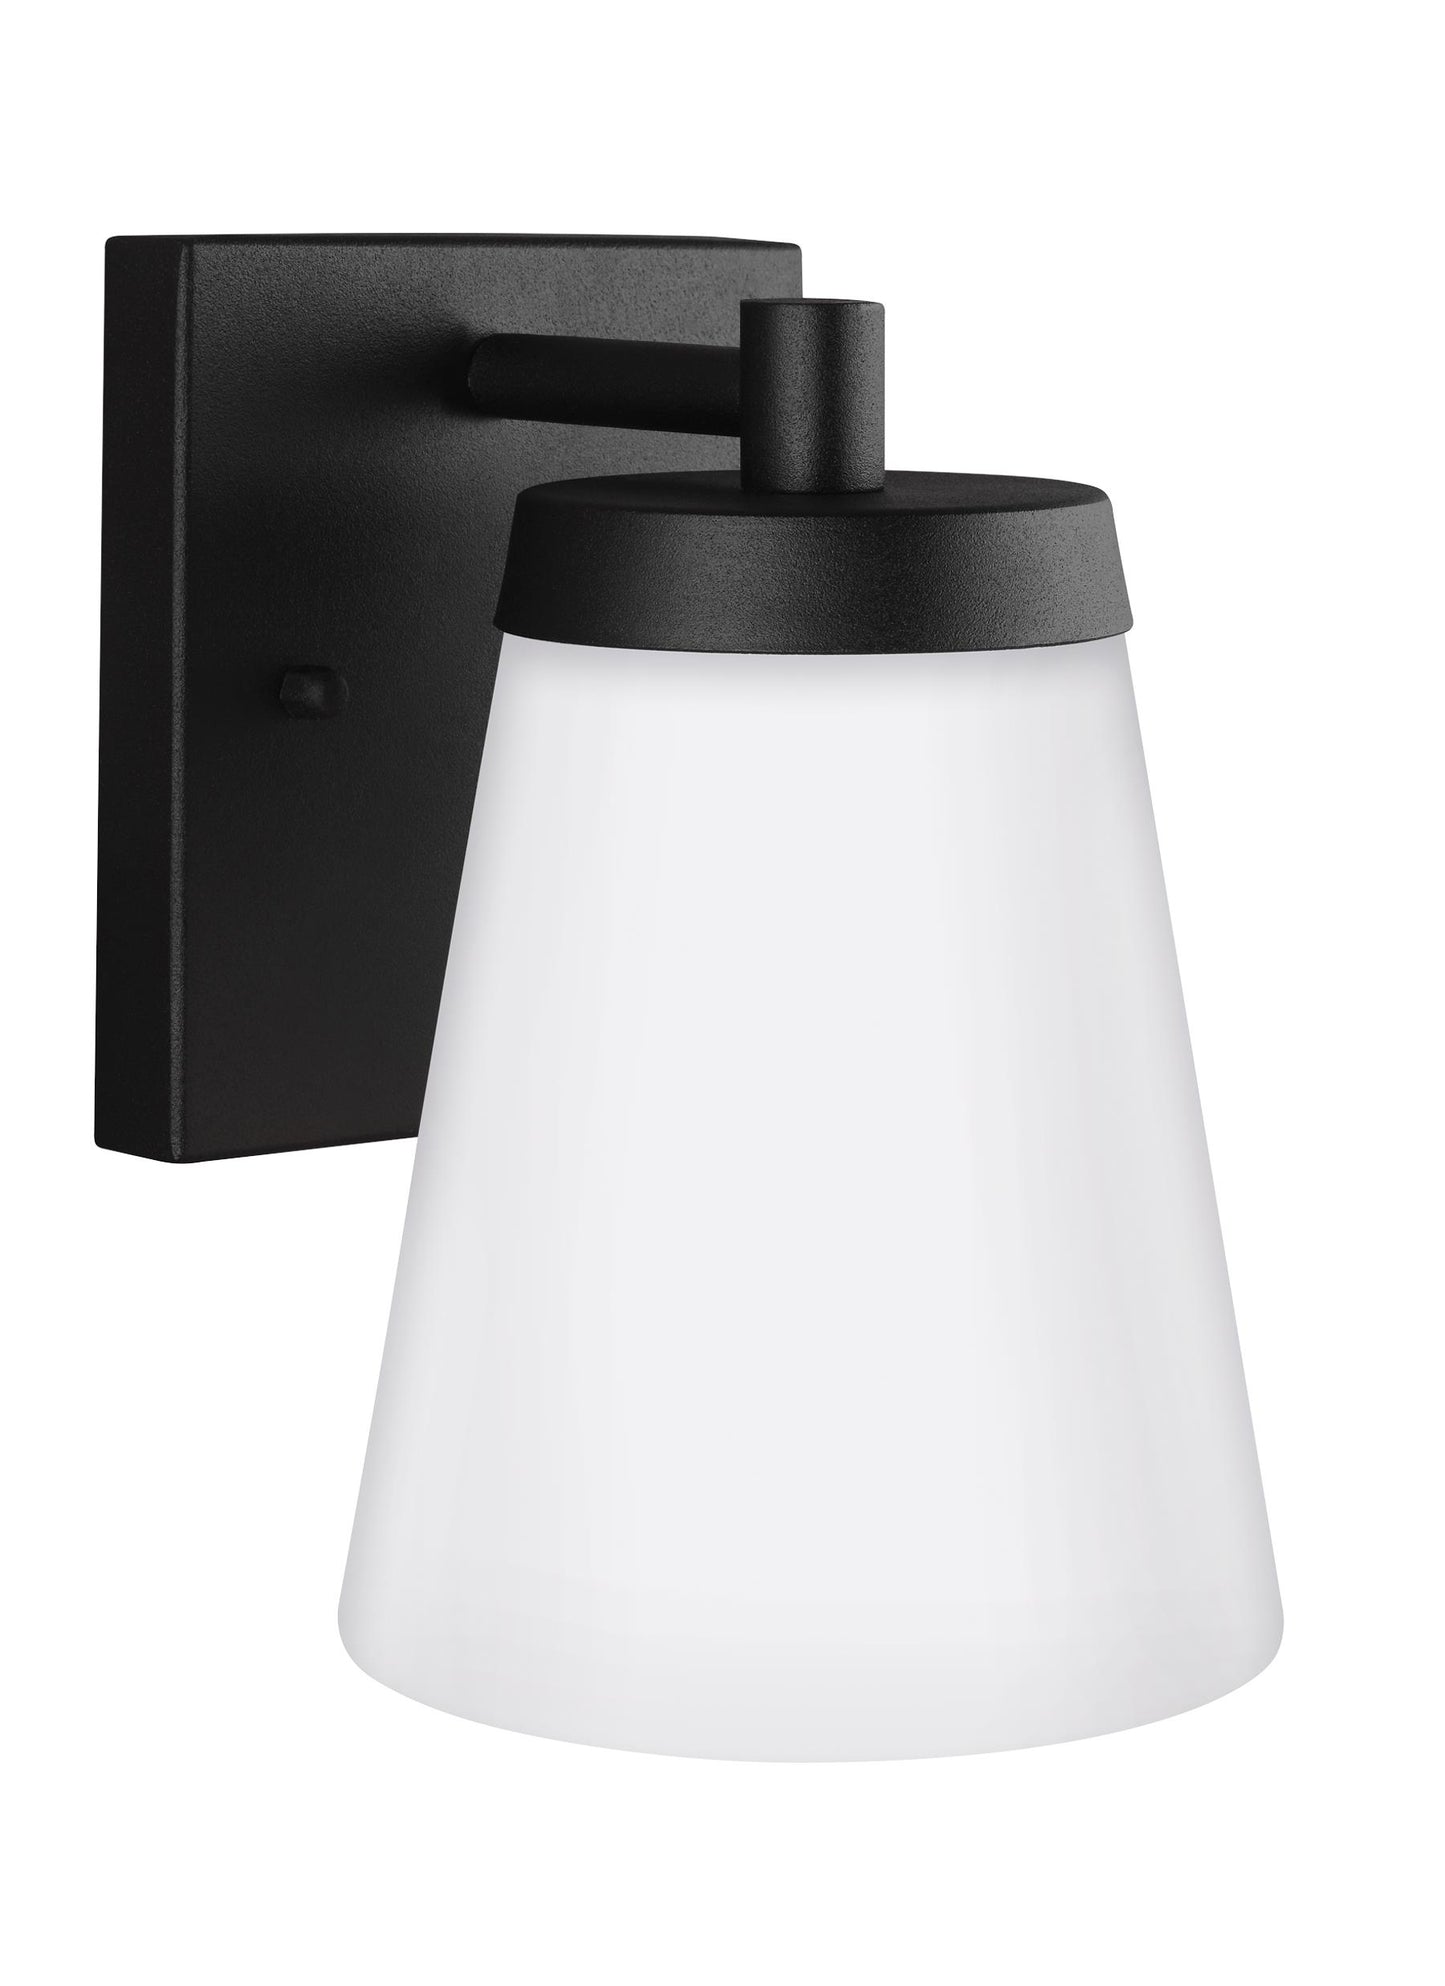 Renville transitional 1-light outdoor exterior small wall lantern sconce in black finish with satin etched glass shade